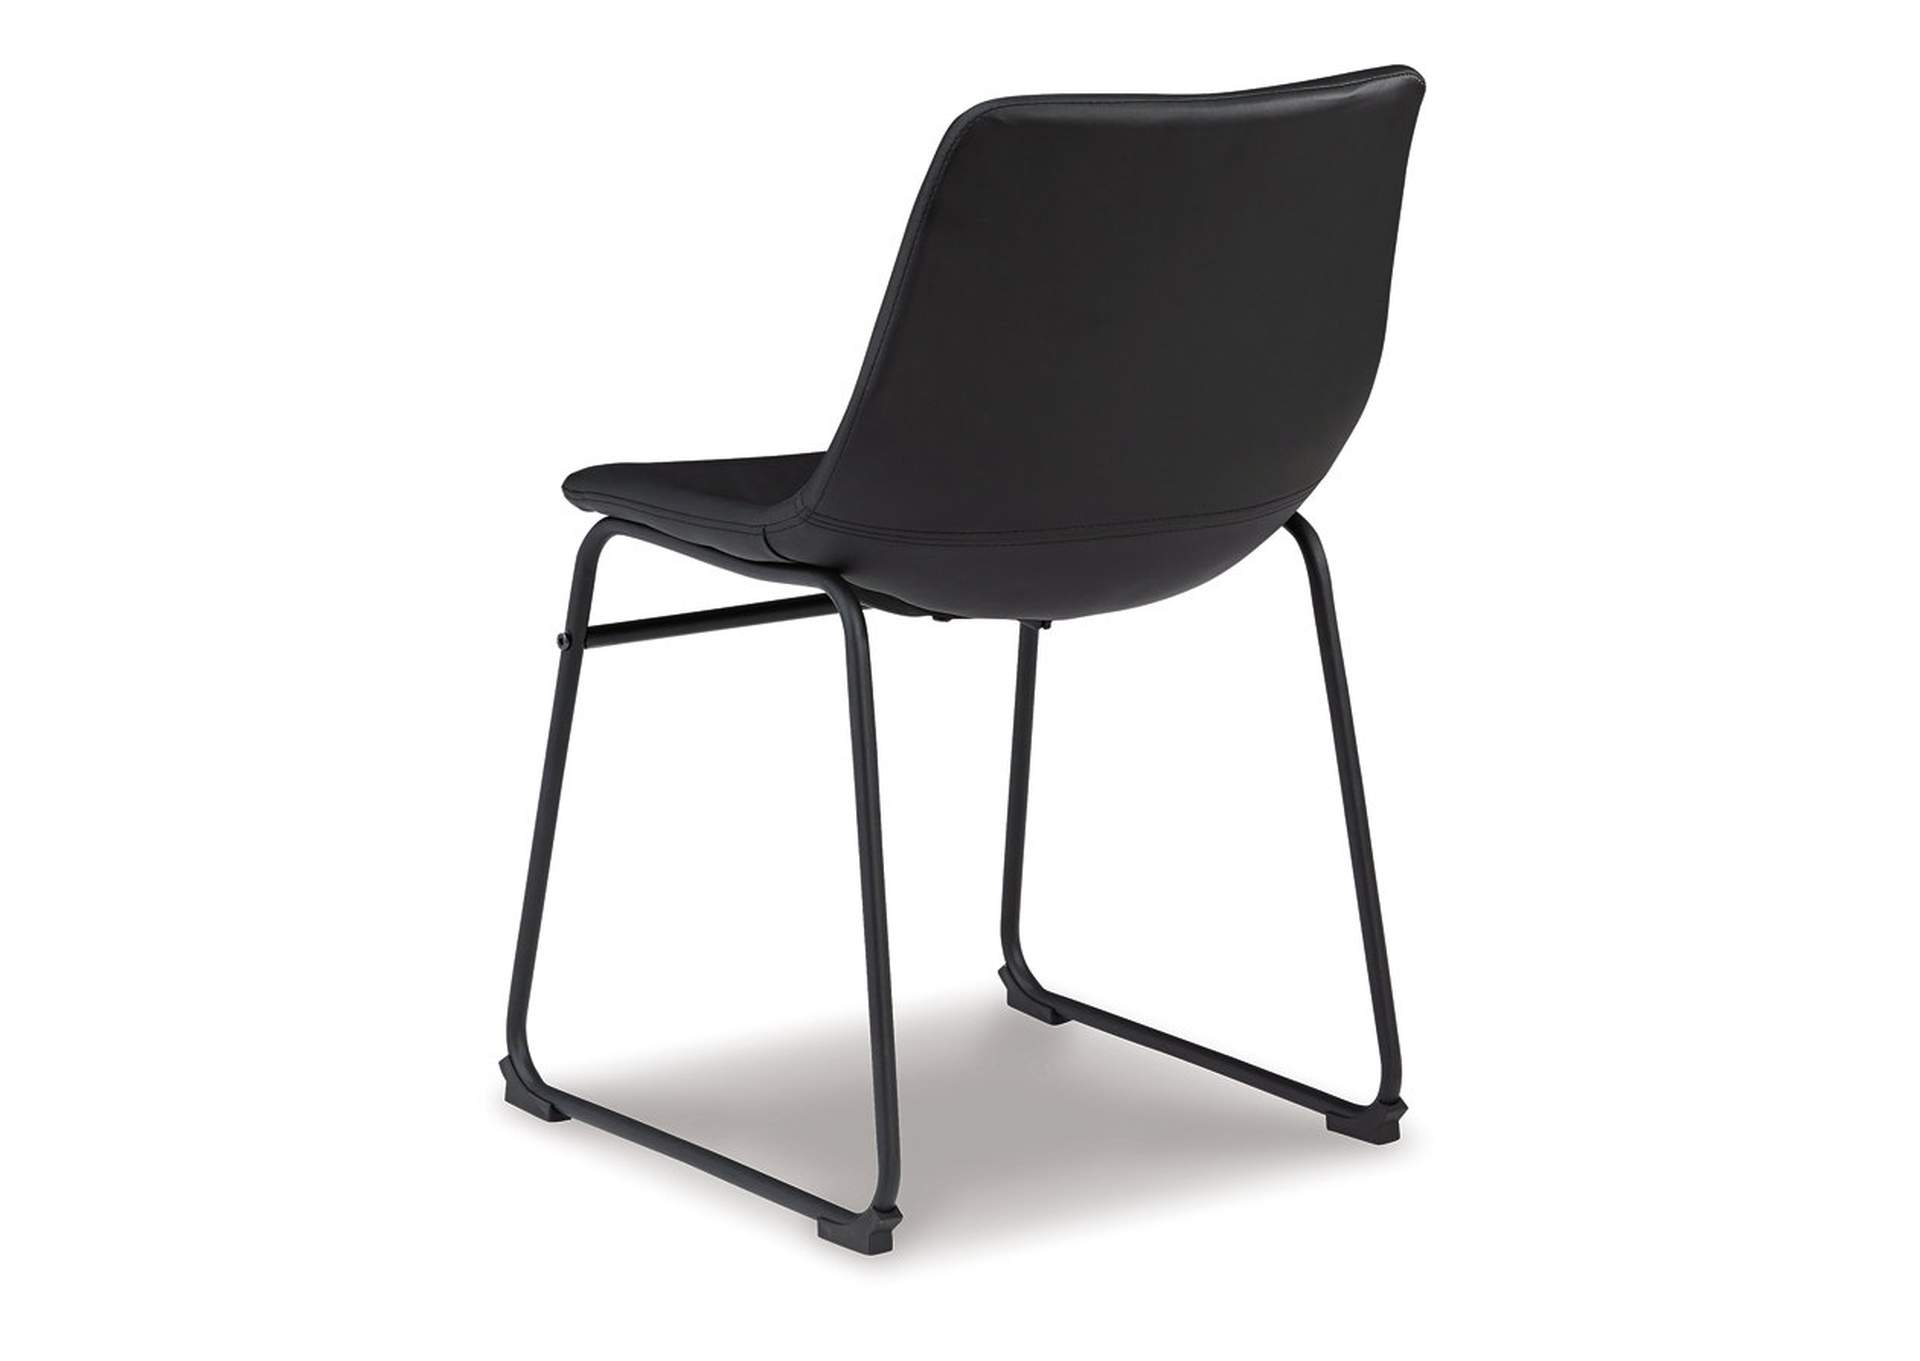 Centiar Dining Chair,Signature Design By Ashley